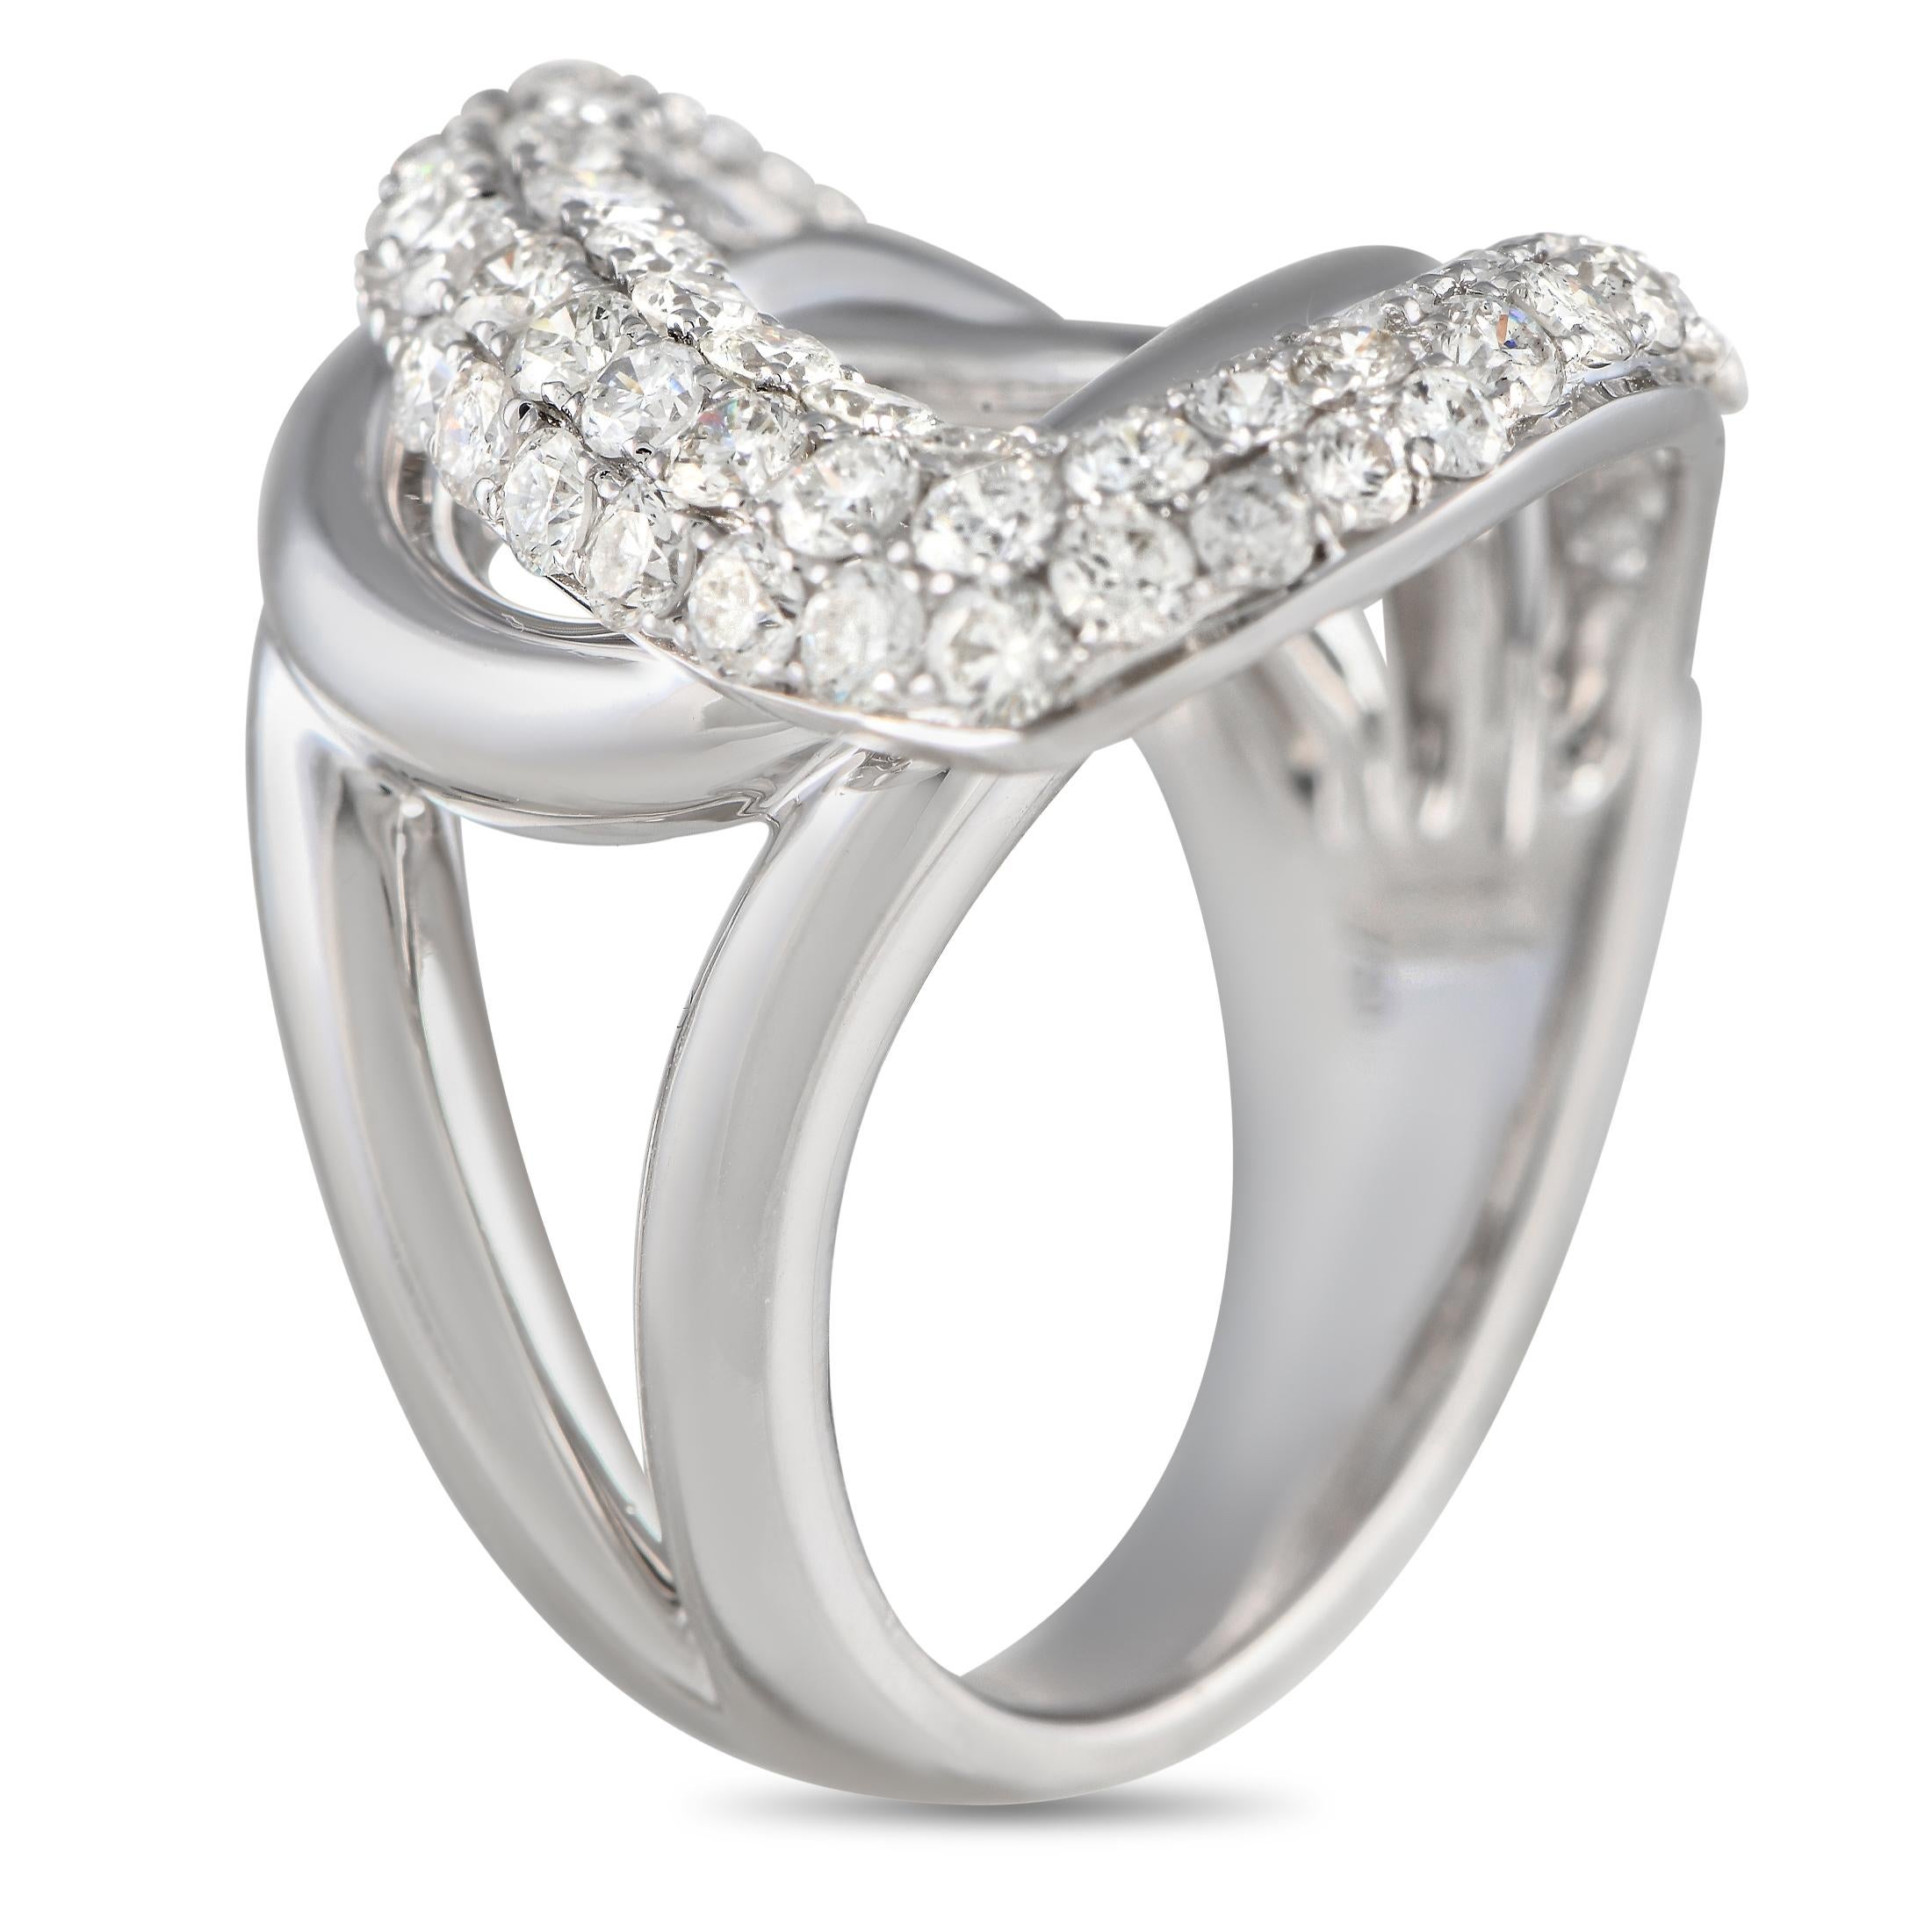 Sleek and incredibly sophisticated, this impeccable ring features a uniquely elegant 18K White Gold setting. The beautifully curved lines are only elevated by the series of sparkling diamonds, which together possess a total weight of 1.55 carats.